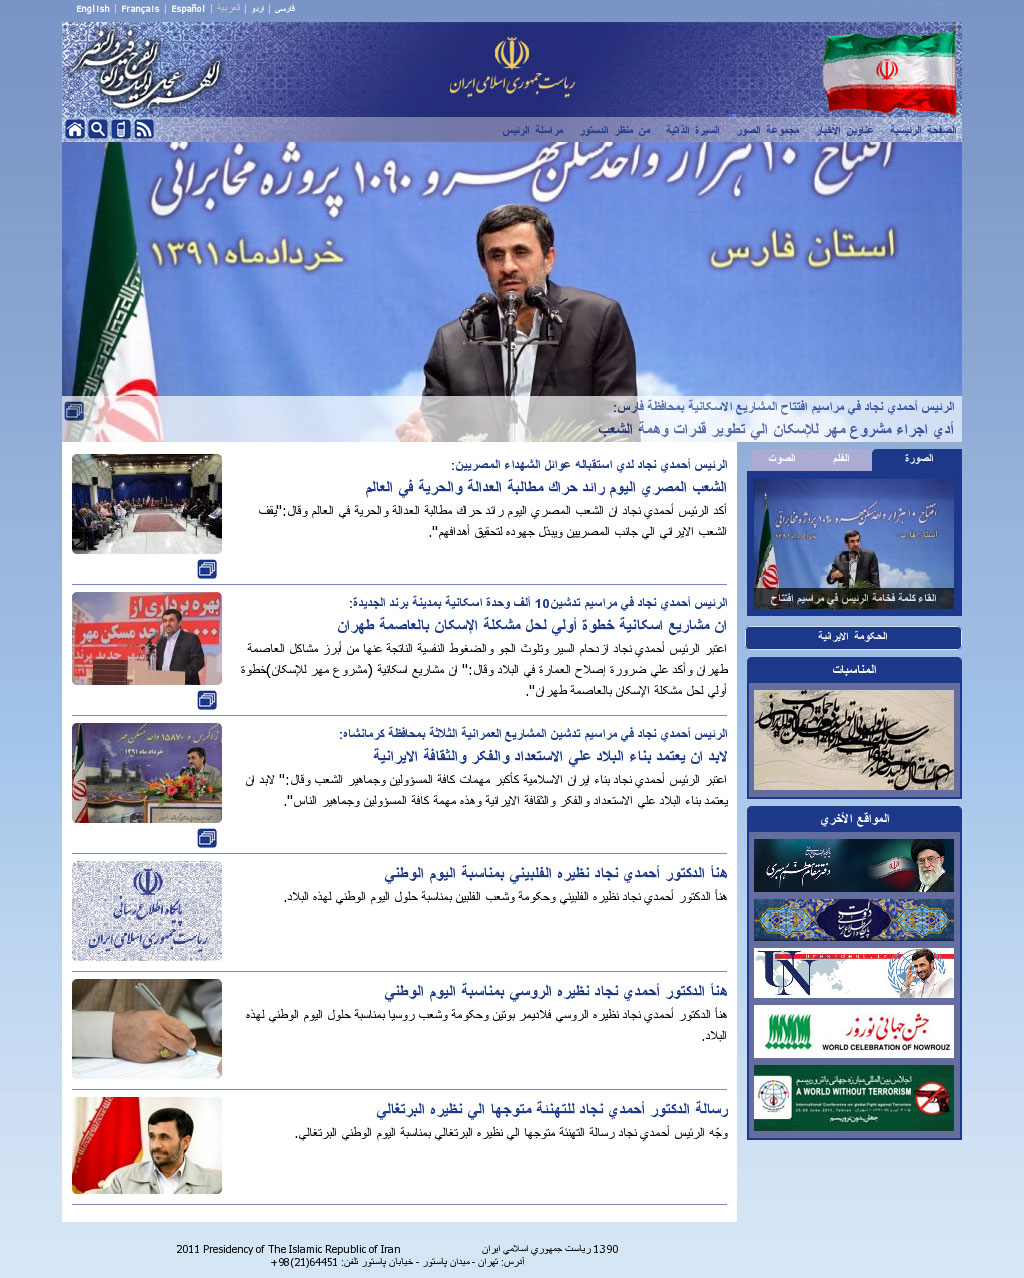 Official website of the Islamic Republic of Iran